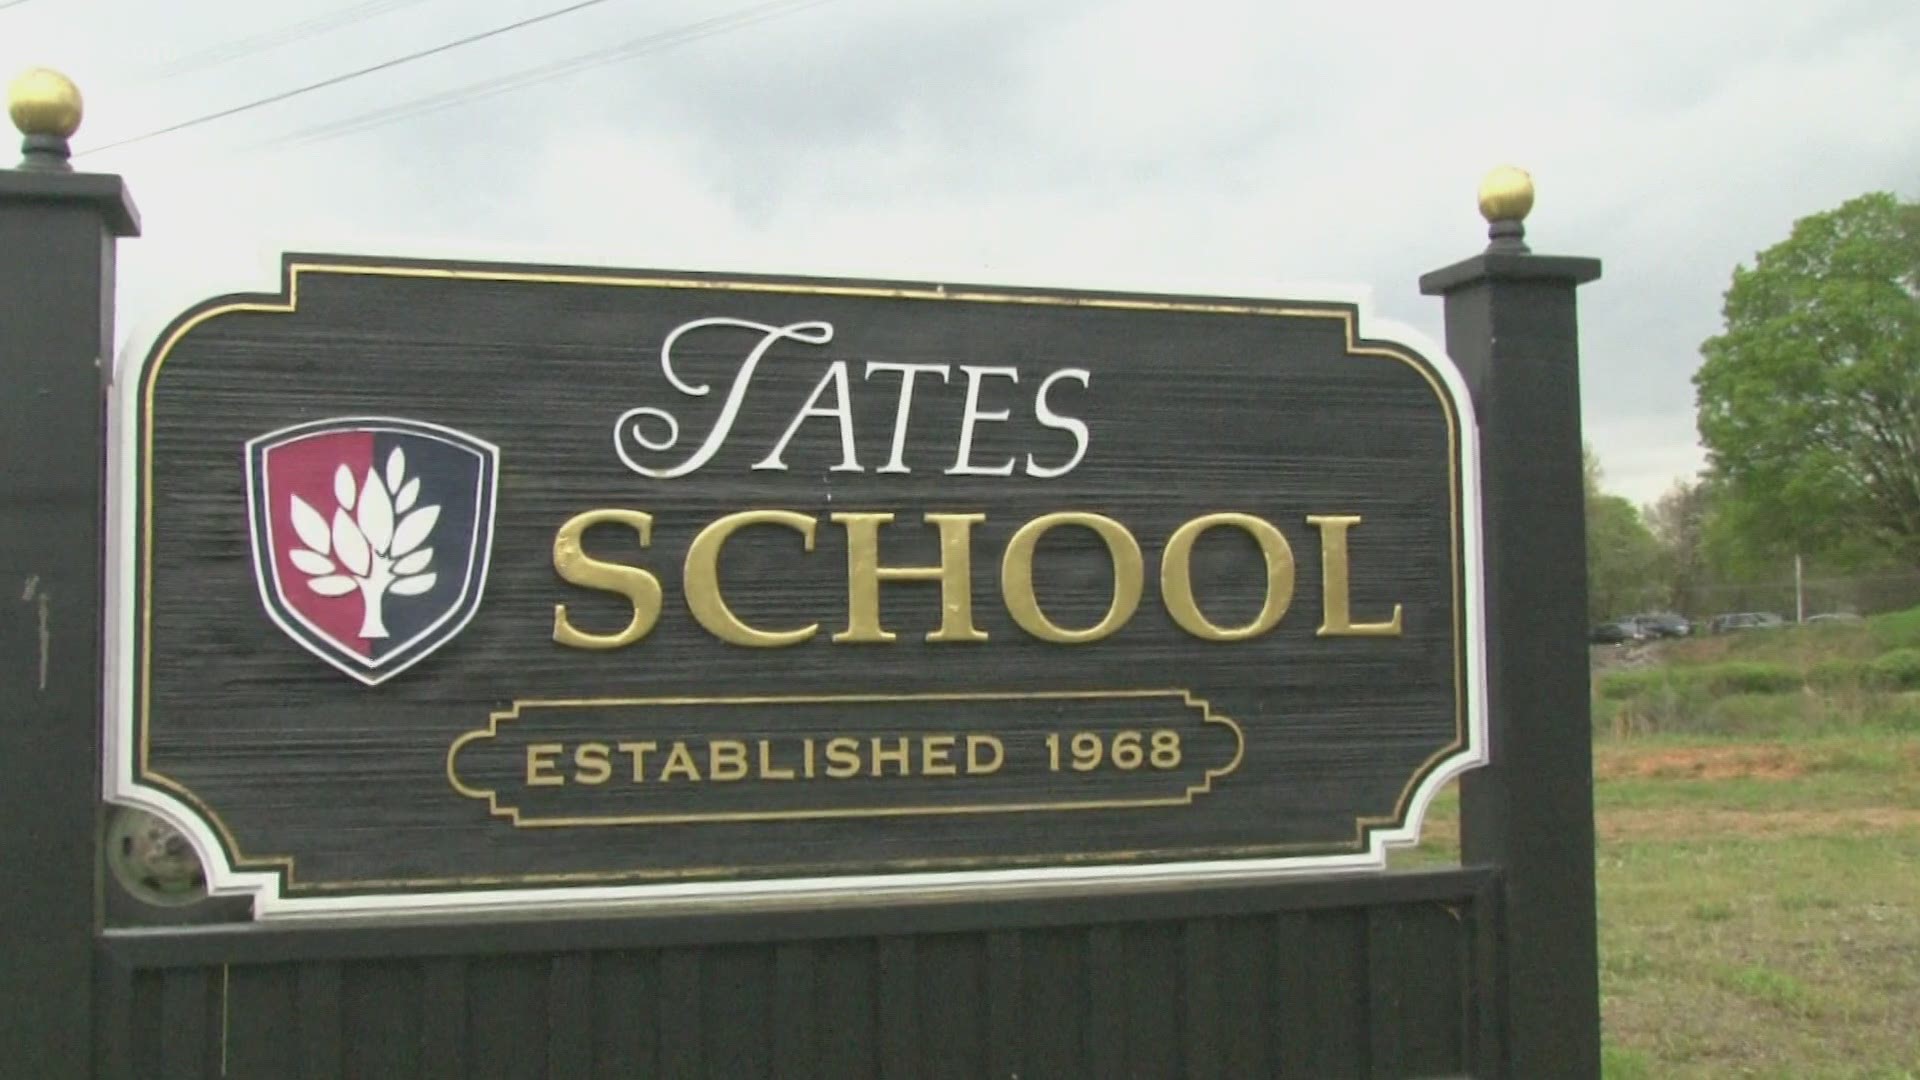 Tate's School was able to use its 54-acre campus to offer outdoor classes for students, allowing for social distancing.